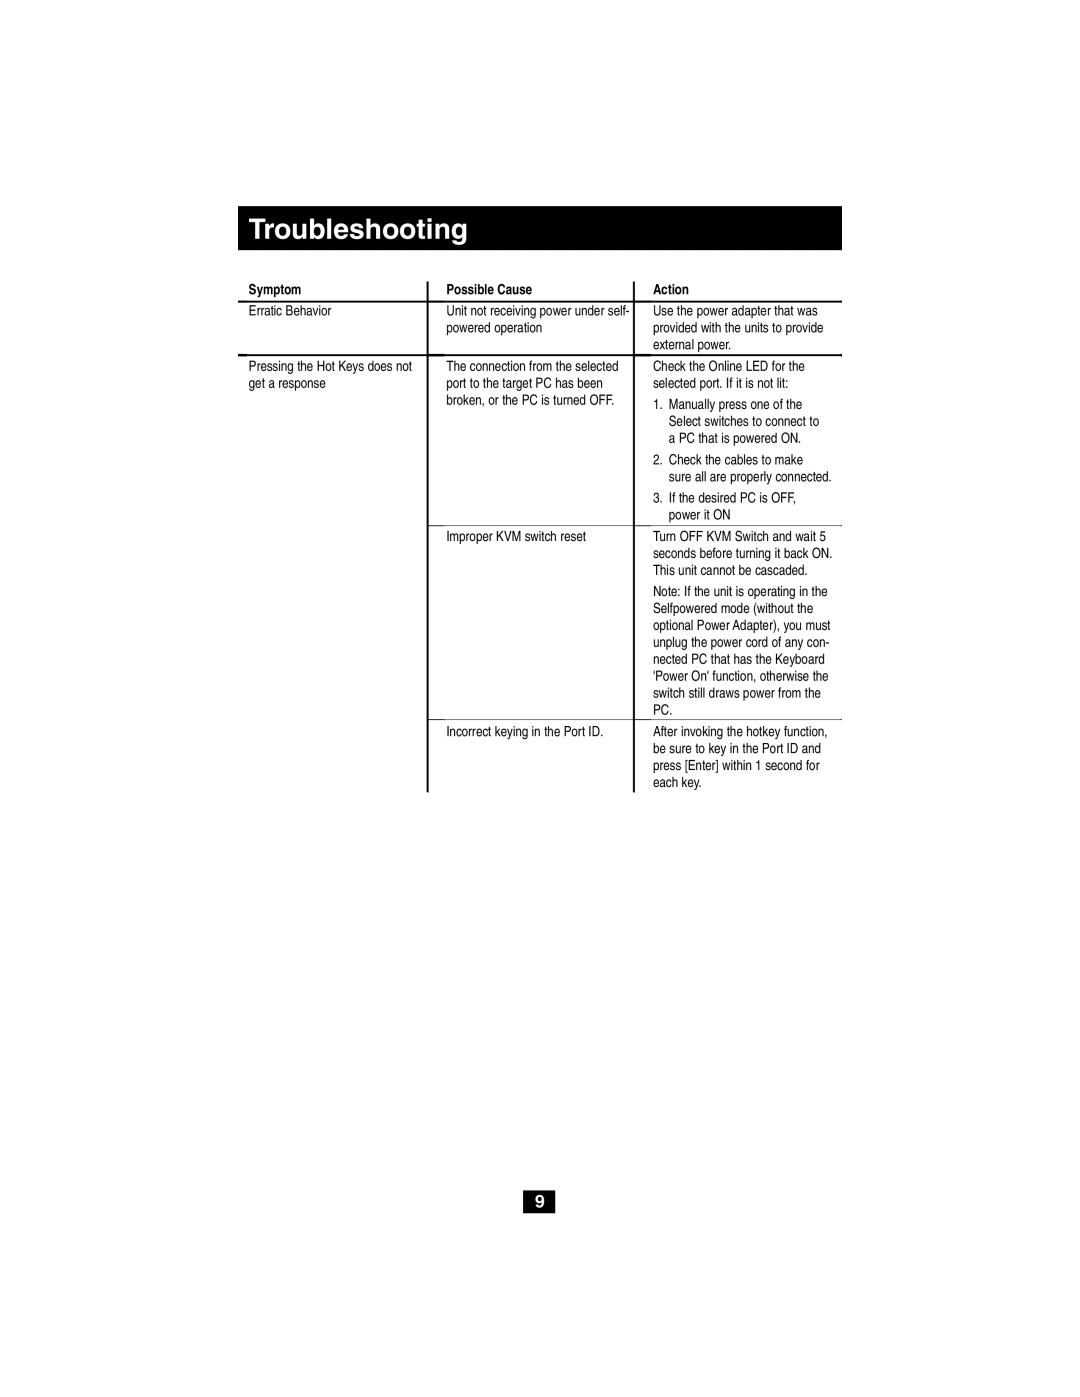 Tripp Lite B004-008 owner manual Troubleshooting, Symptom, Possible Cause, Action 